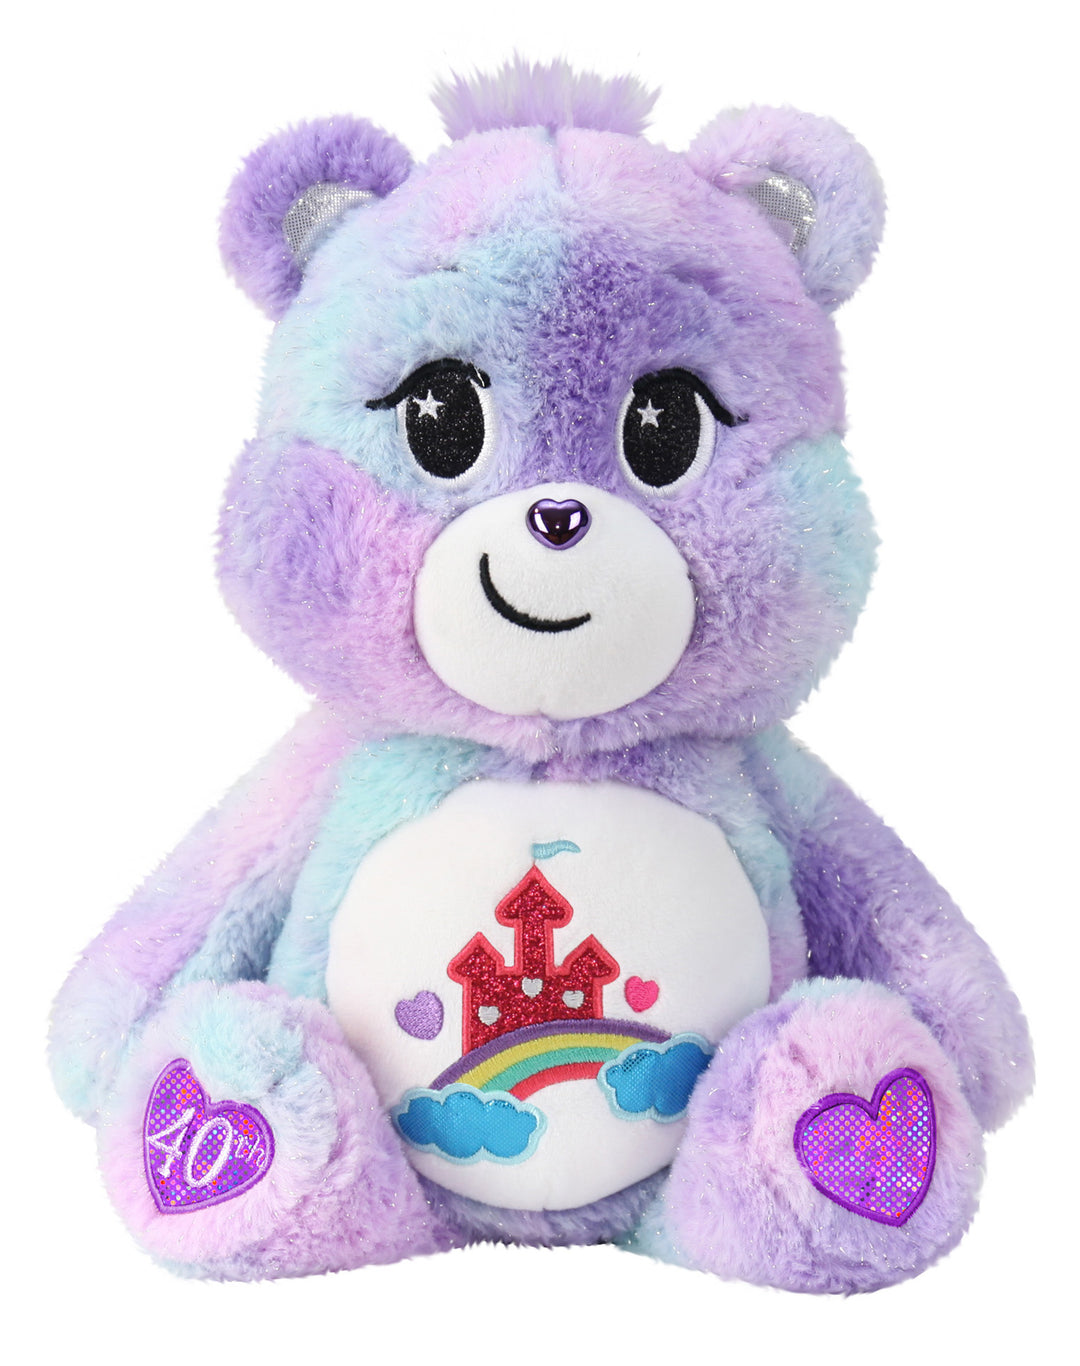 Official 35cm 40th Anniversary Care-A-Lot Care Bear